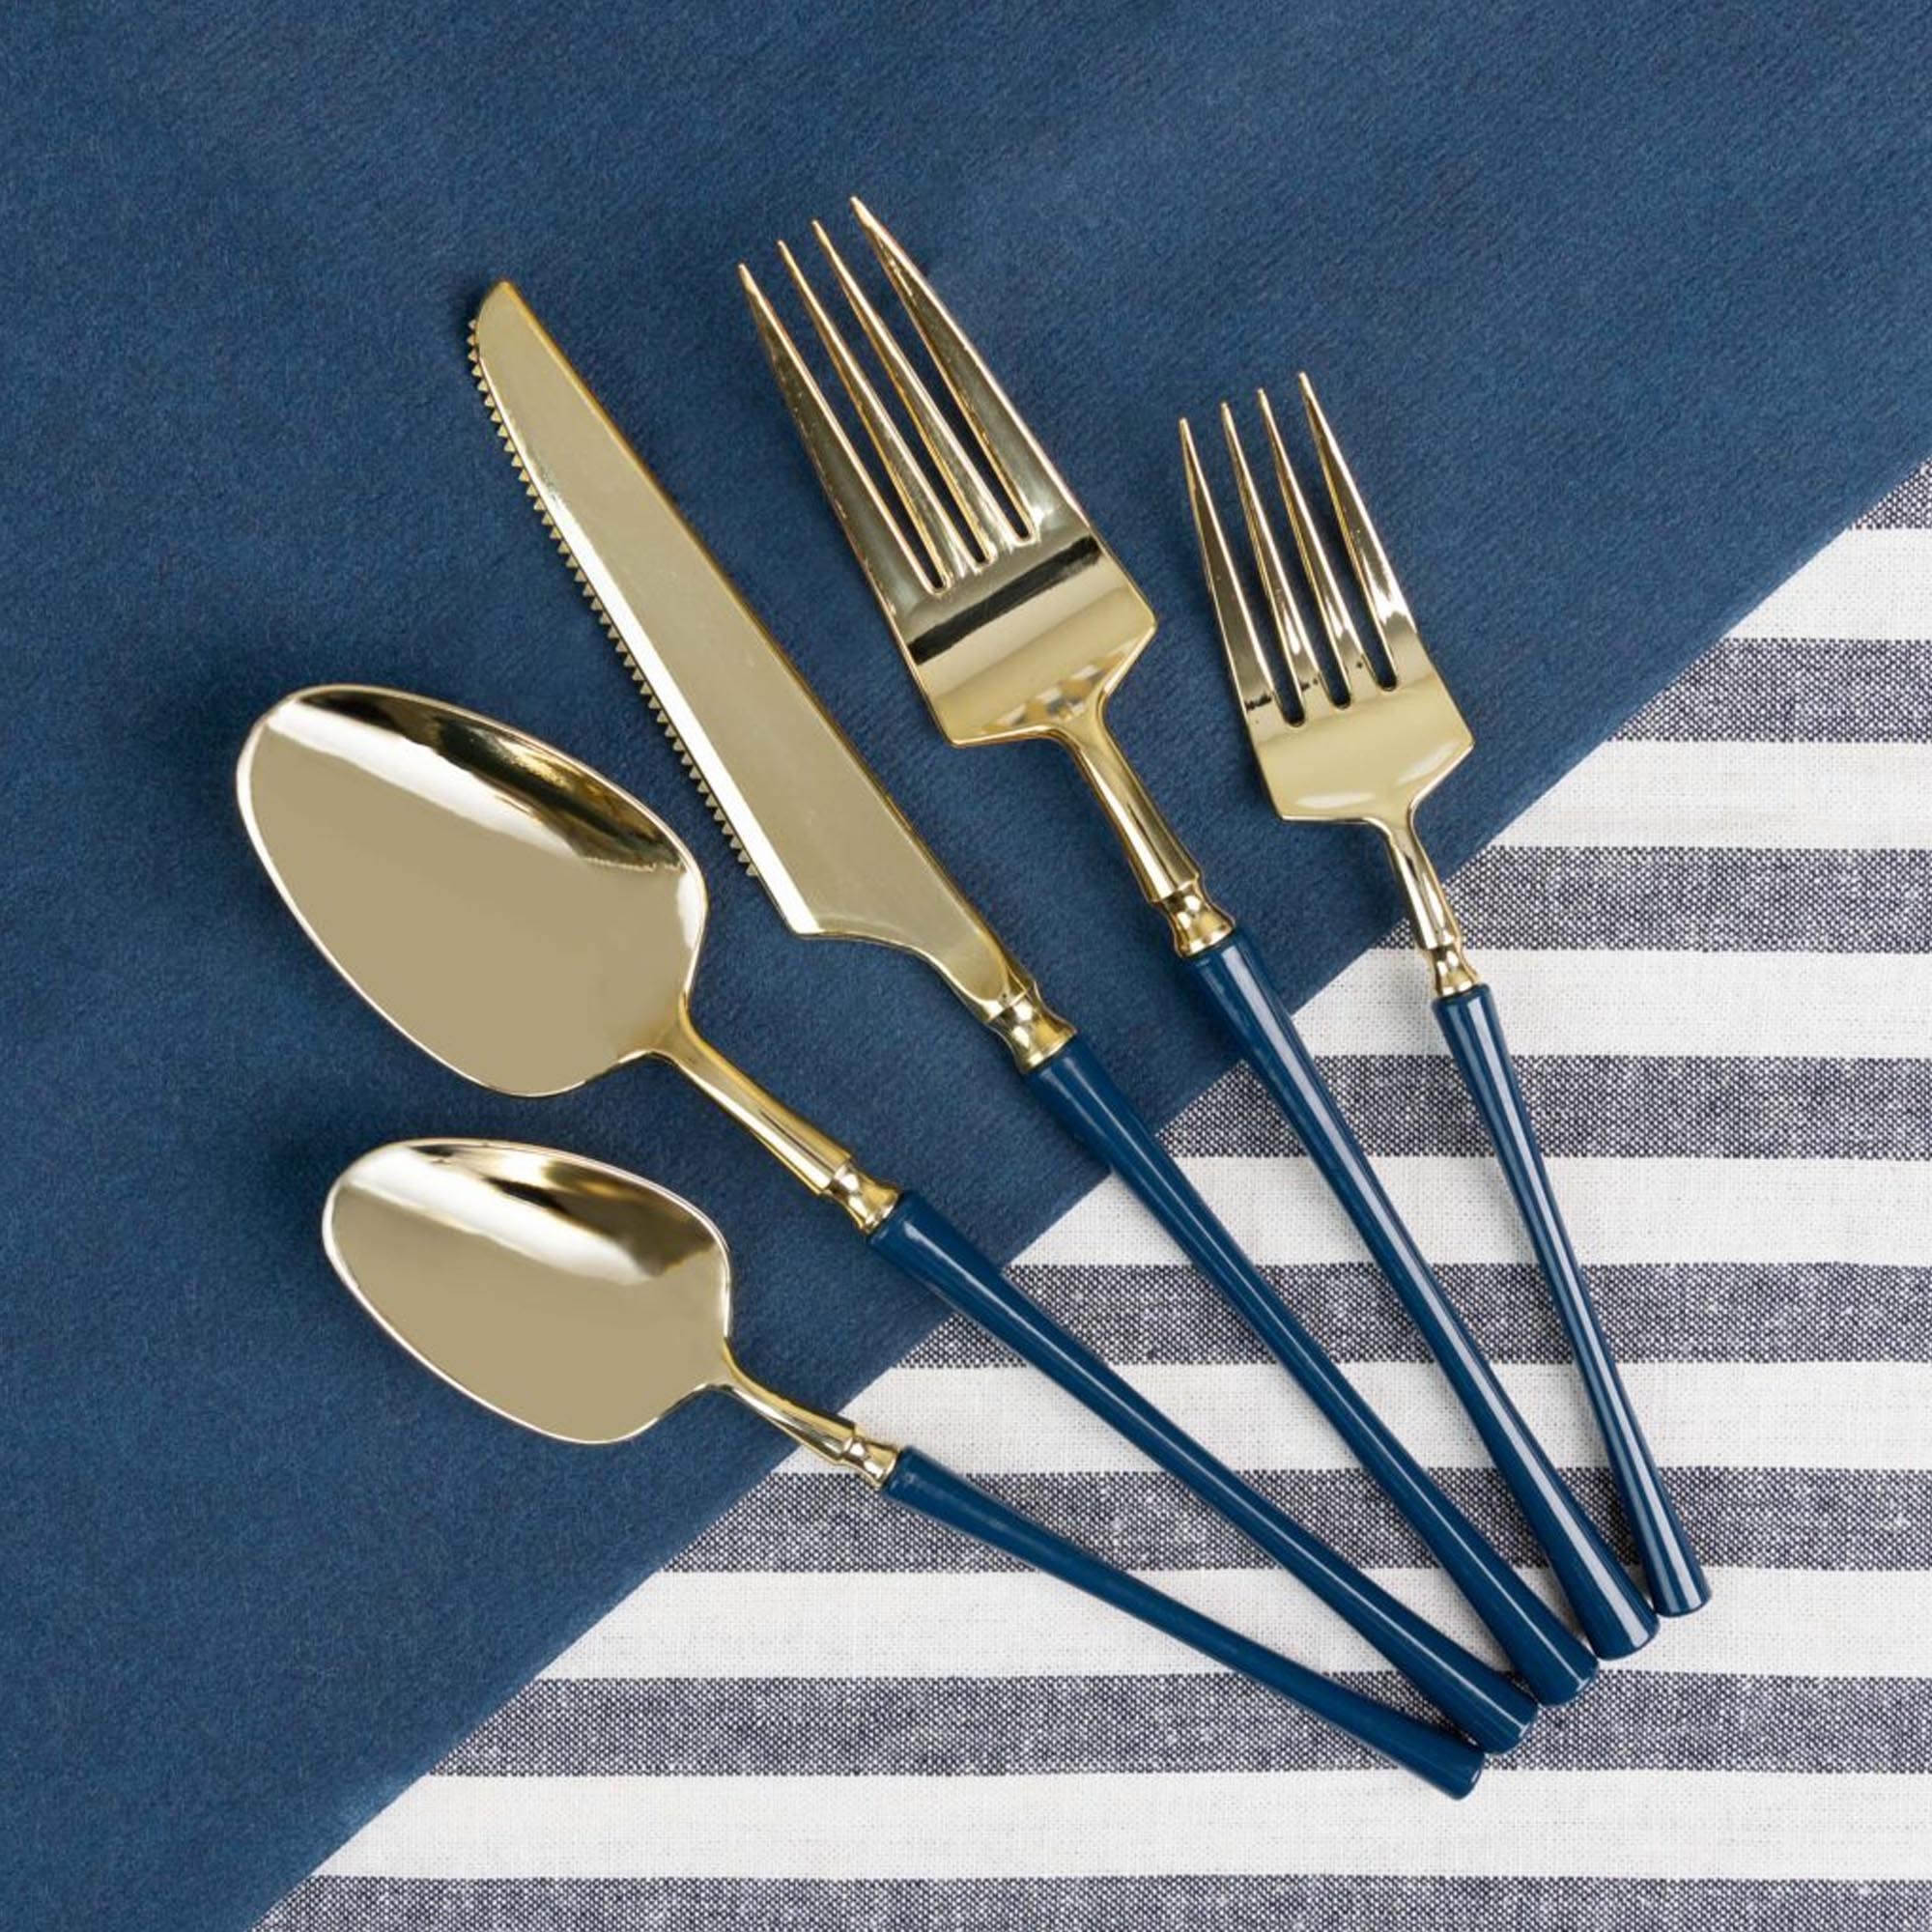 Plastic Salad Forks Navy Blue and Gold Infinity Flatware Collection